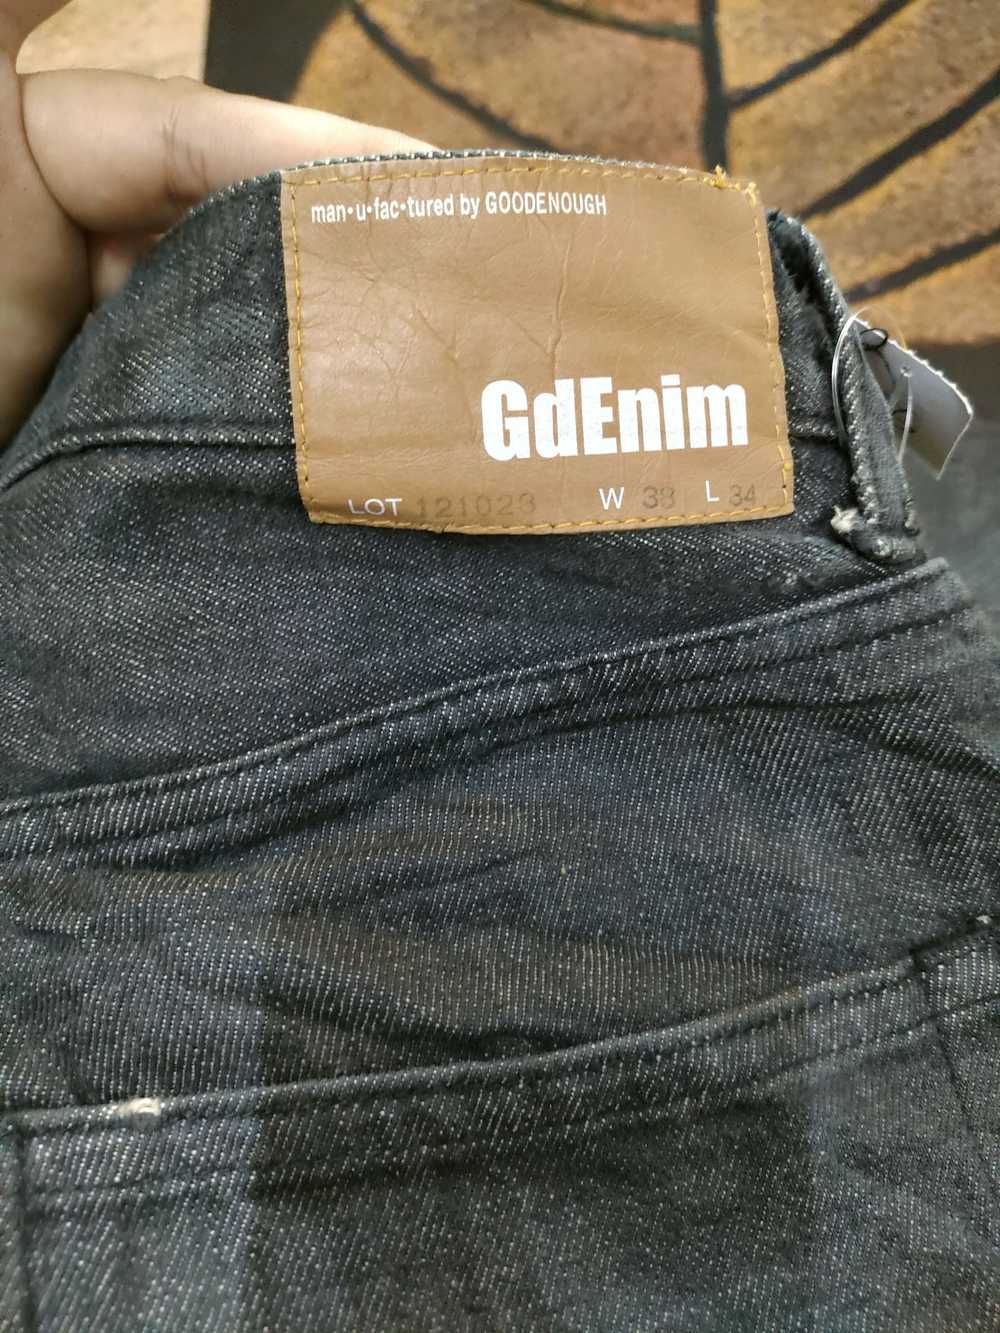 Goodenough GDEH Selvedge Jeans - image 3